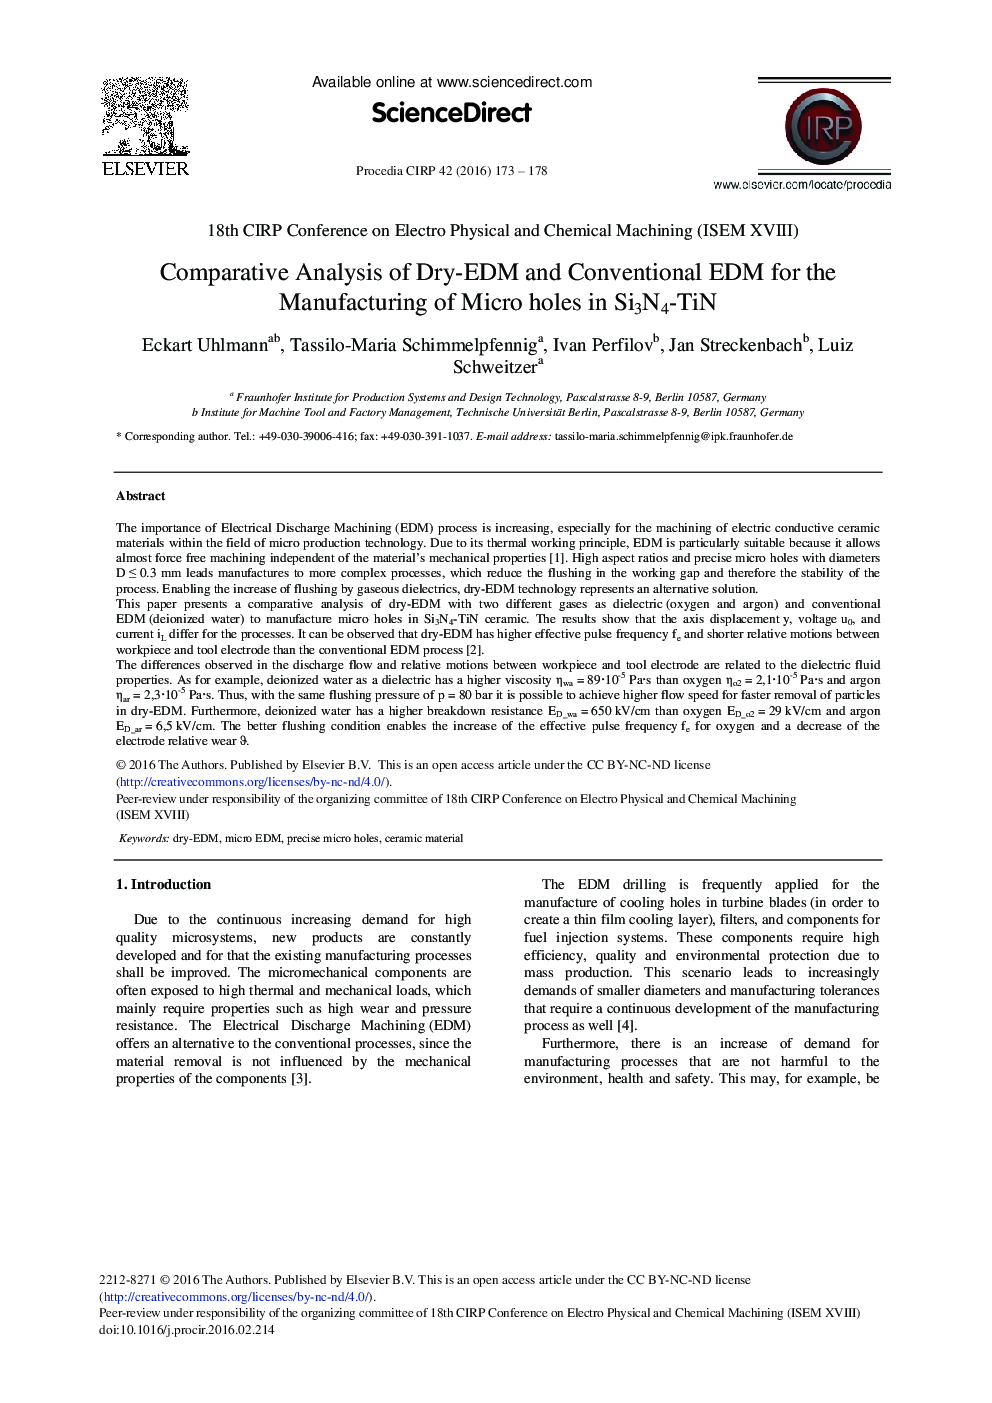 Comparative Analysis of Dry-EDM and Conventional EDM for the Manufacturing of Micro Holes in Si3N4-TiN 